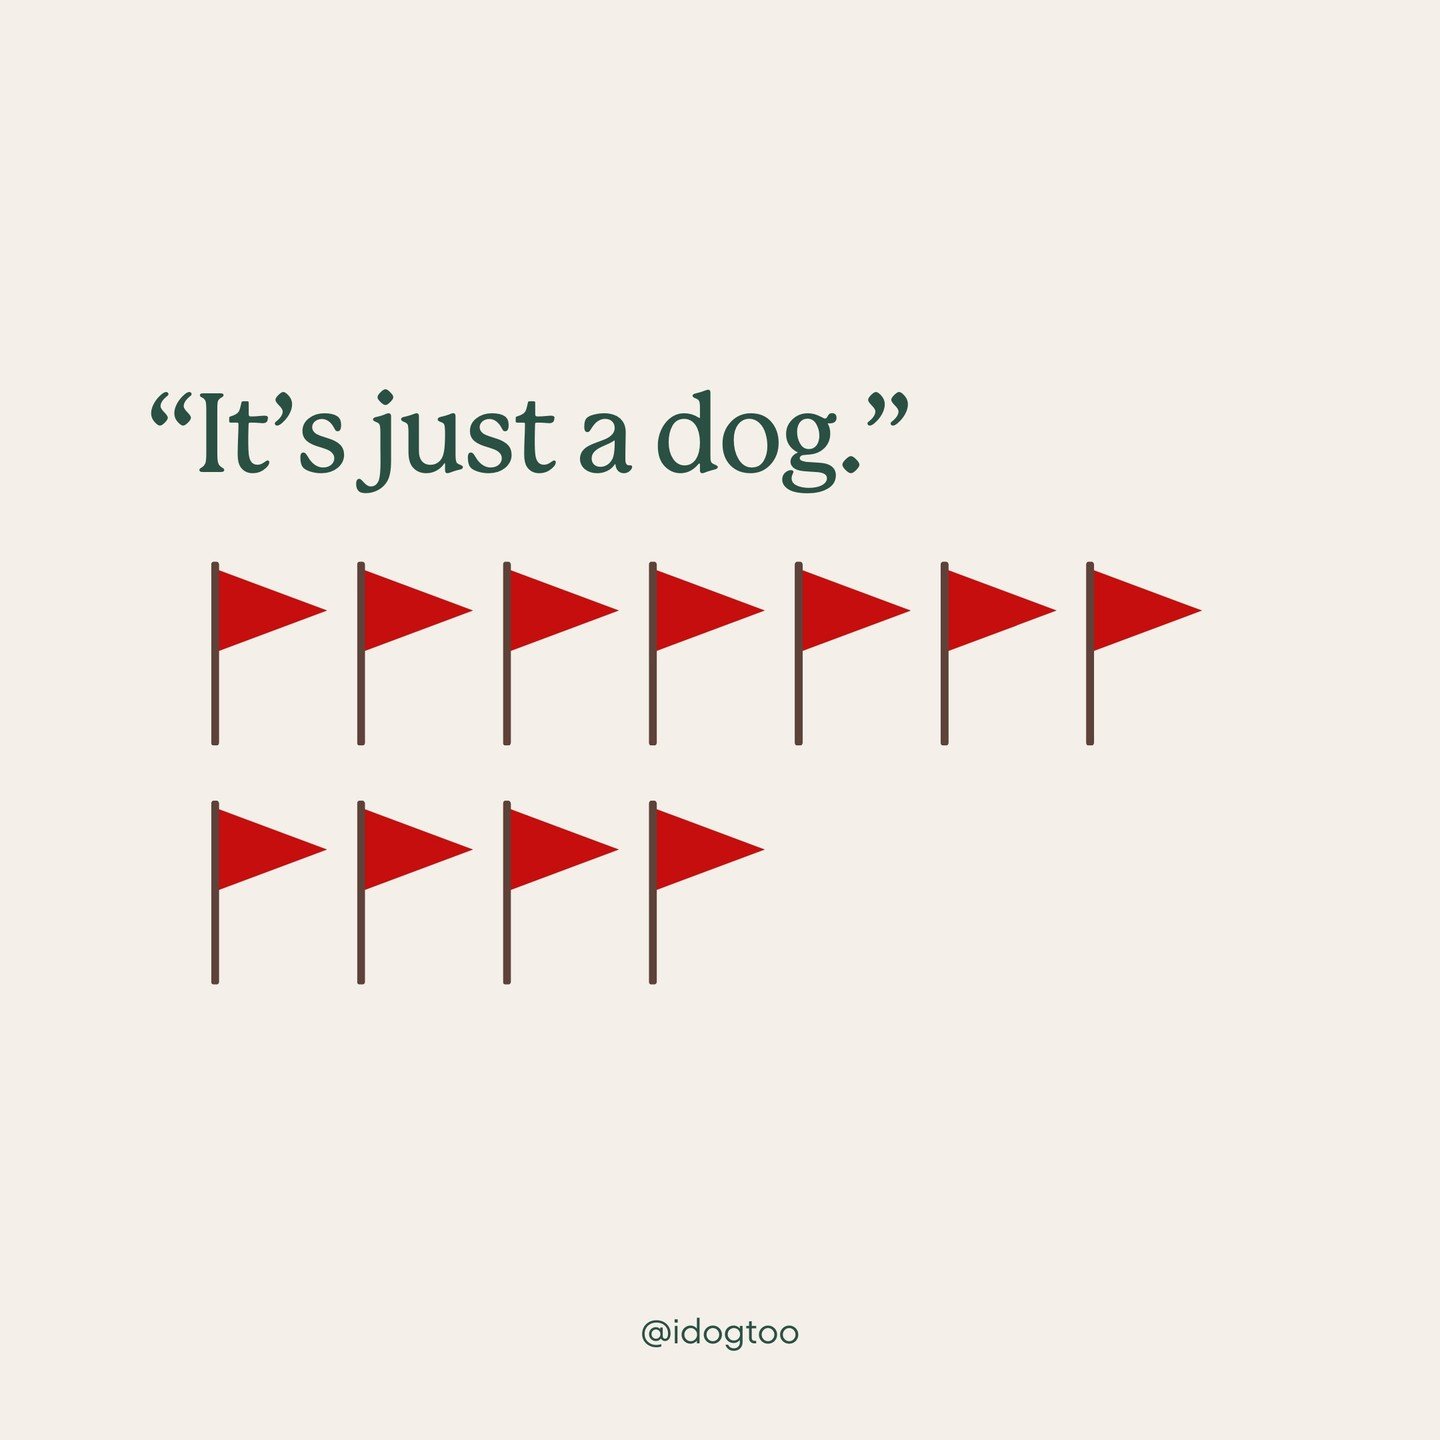 🚩🚩🚩🚩 &quot;You're dead to me Brenda. That is MY child you're talking about.&quot;
&bull;
&bull;
&bull;
&bull;
&bull;
&bull;
#dogmom #dogmomlife #redflags #dogquotes